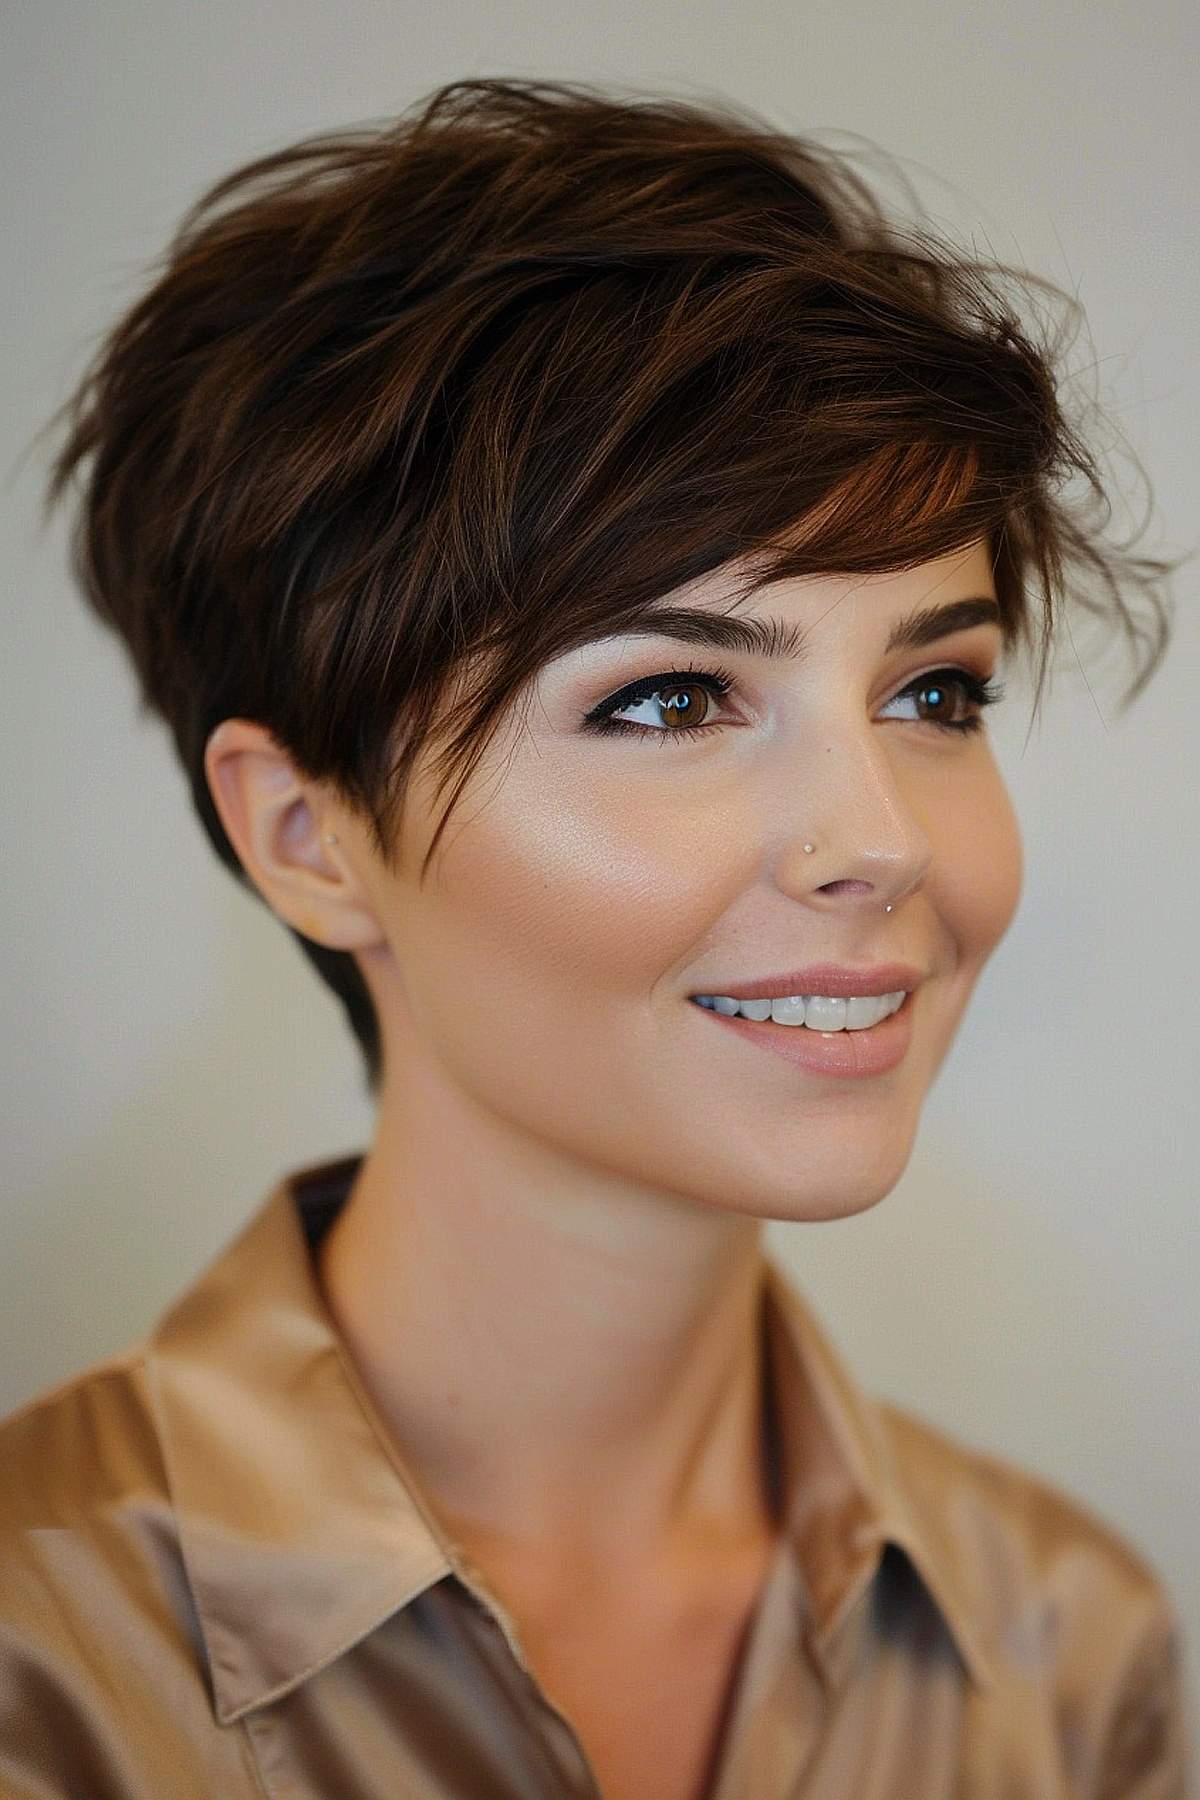 Woman with a stylish pixie cut featuring deep brown tones and feathered bangs that highlight the eyes and add texture.